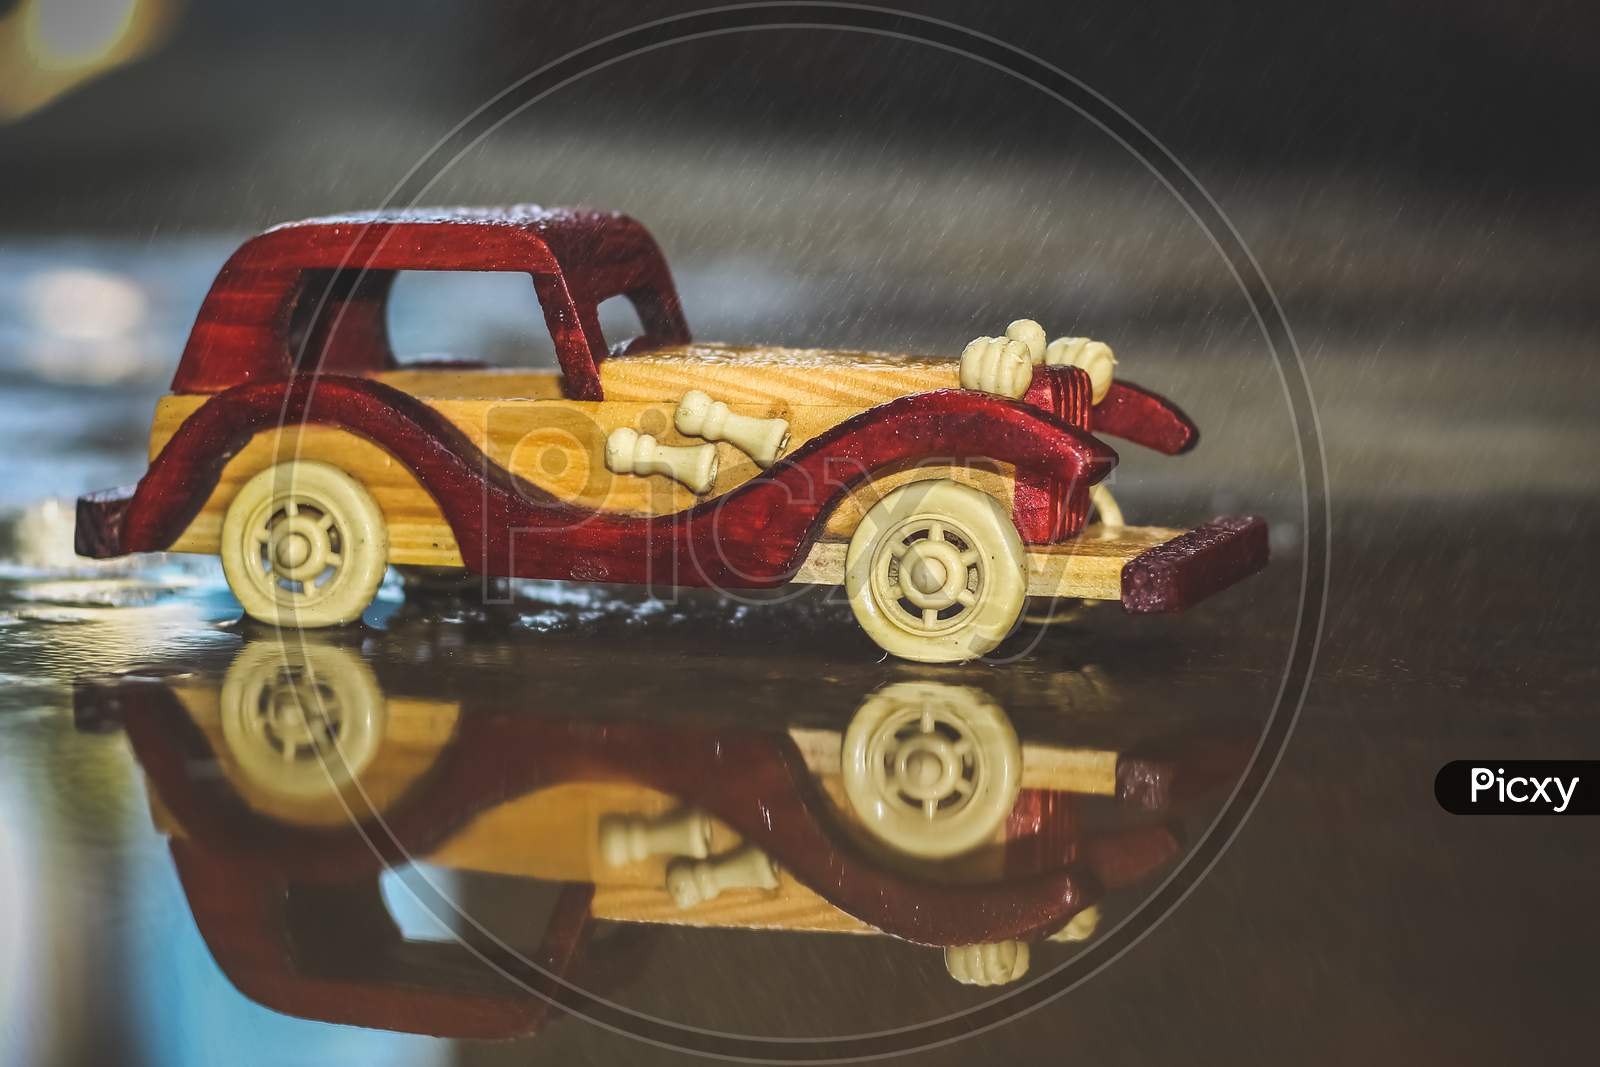 Reflection Vintage Toy Car Under The Rain On The Road. Miniature Car Toy Reflection In Rain. Reflection Red And Yellow Vintage Car On Rain. Rain Falling On Vintage Car Toy Close